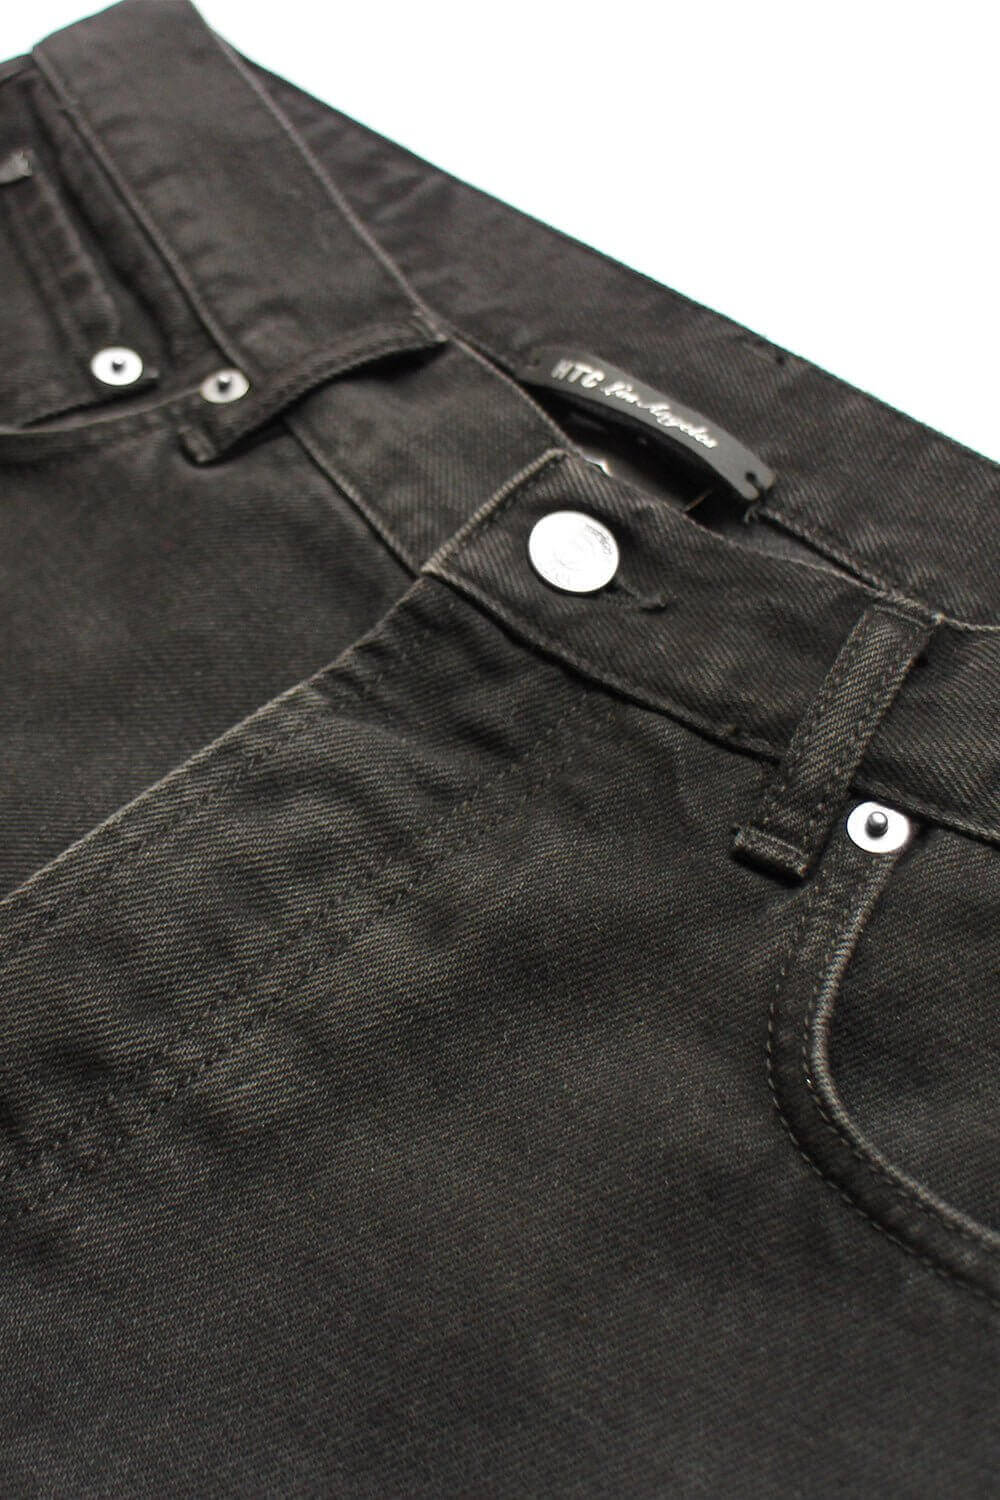 BLACK BULLWASH 03 Straight fit jeans in black denim, 5 pockets, hidden front button closure. Metallic logo detail on the back. 100% cotton. Made in Italy. HTC LOS ANGELES